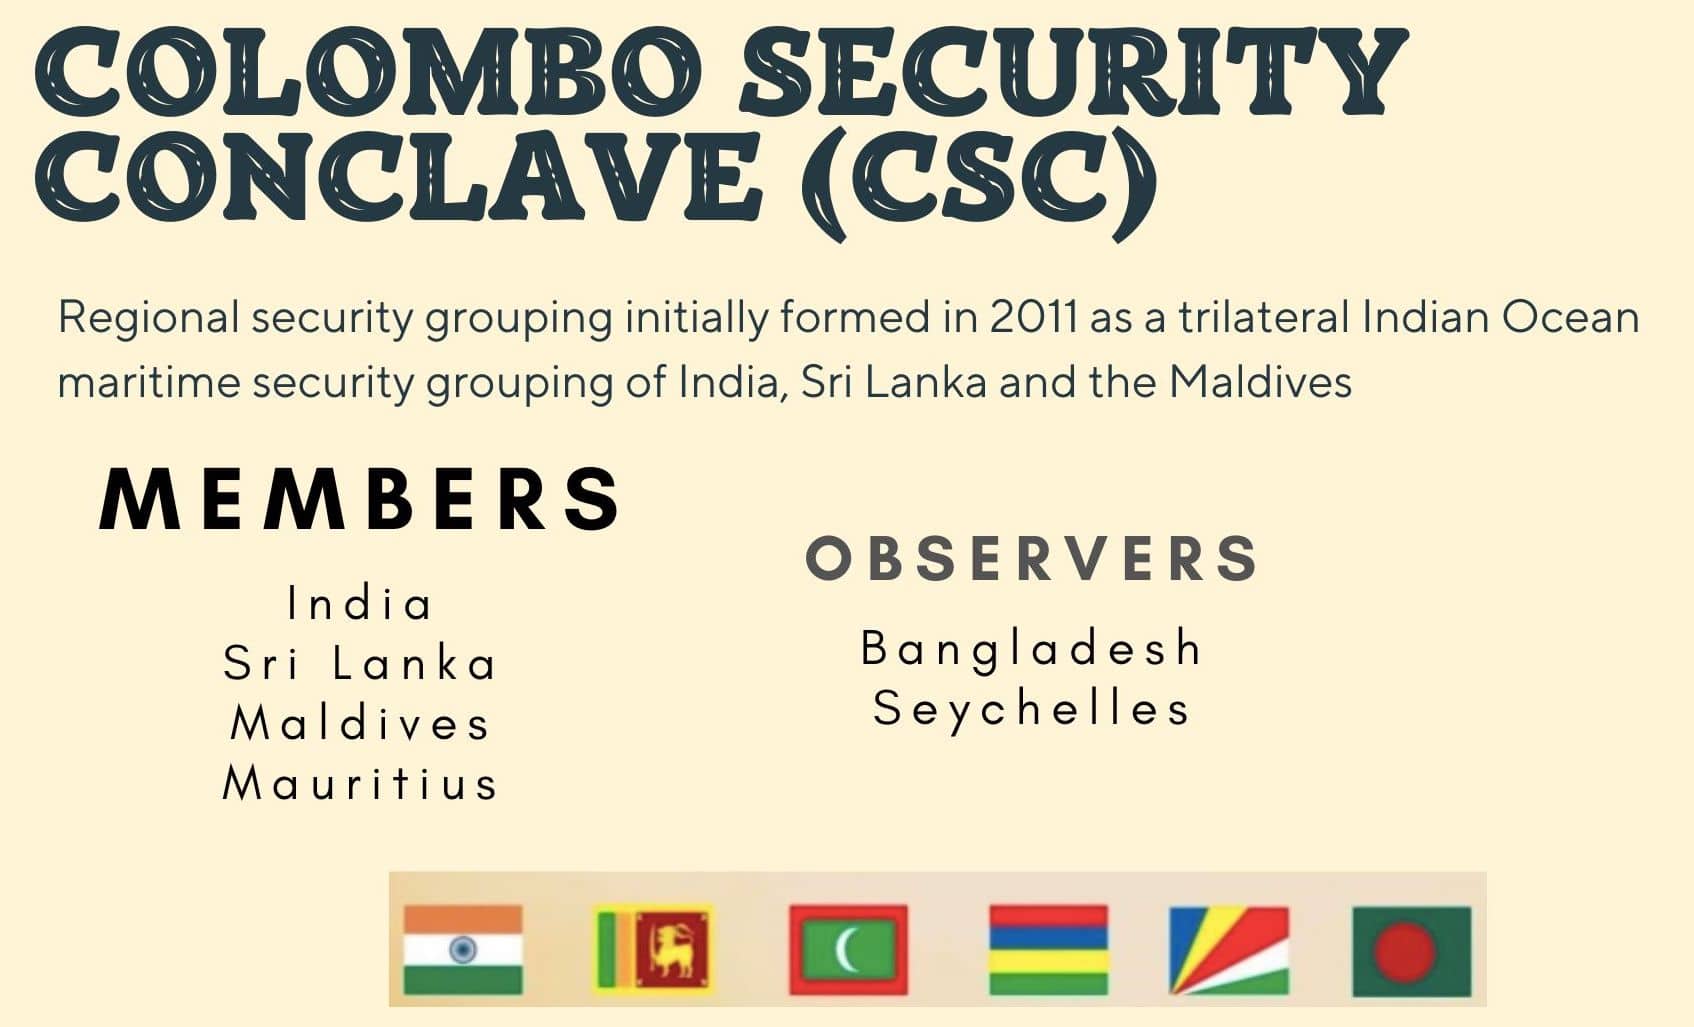 COLOMBO SECURITY CONCLAVE